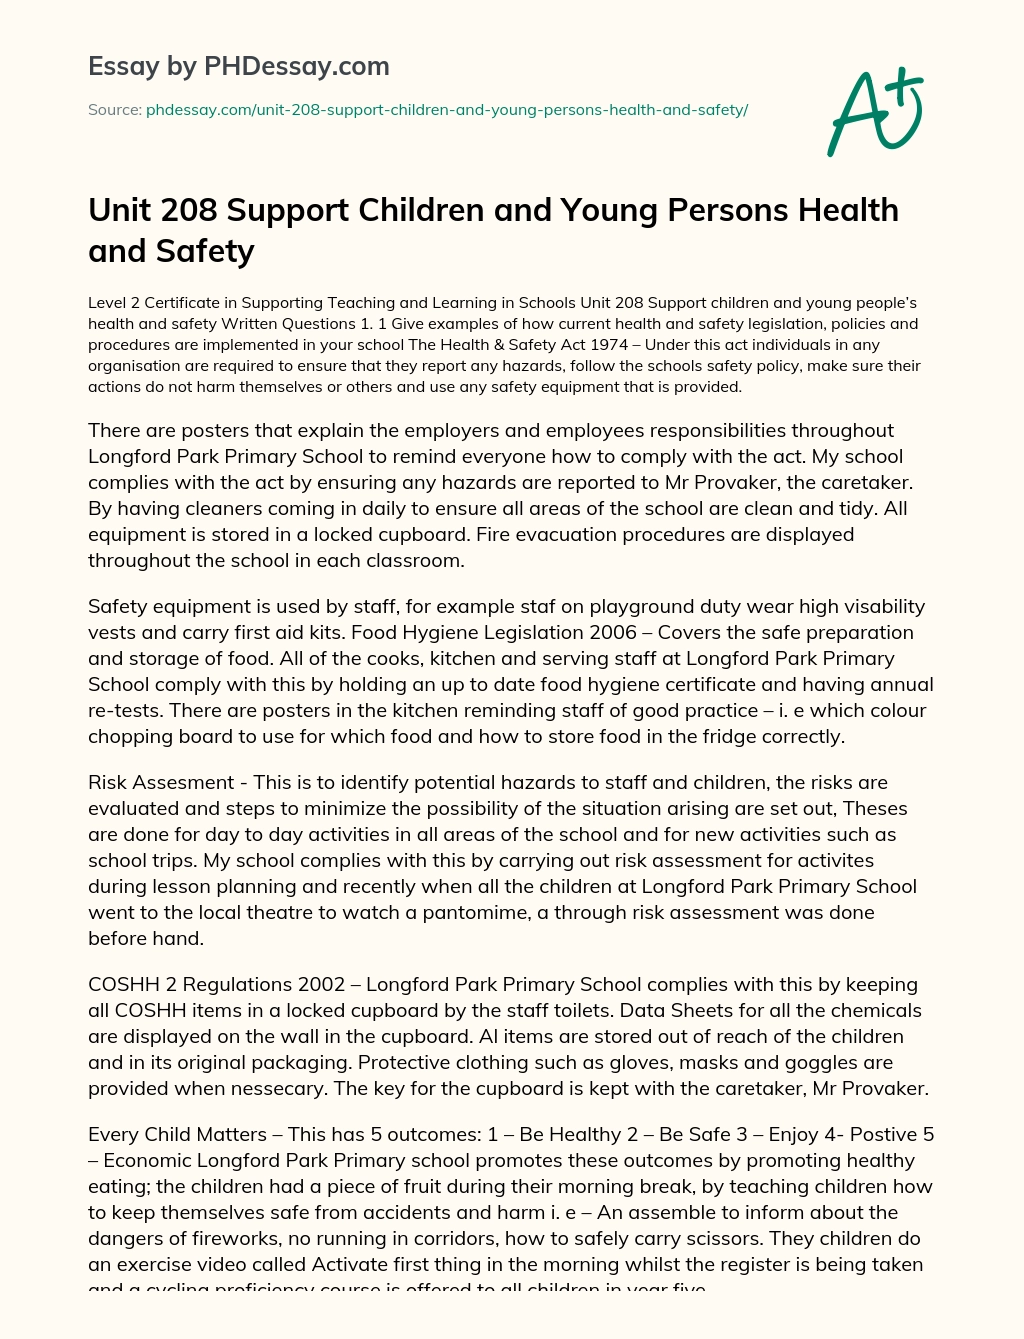 Unit 208 Support Children and Young Persons Health and Safety essay